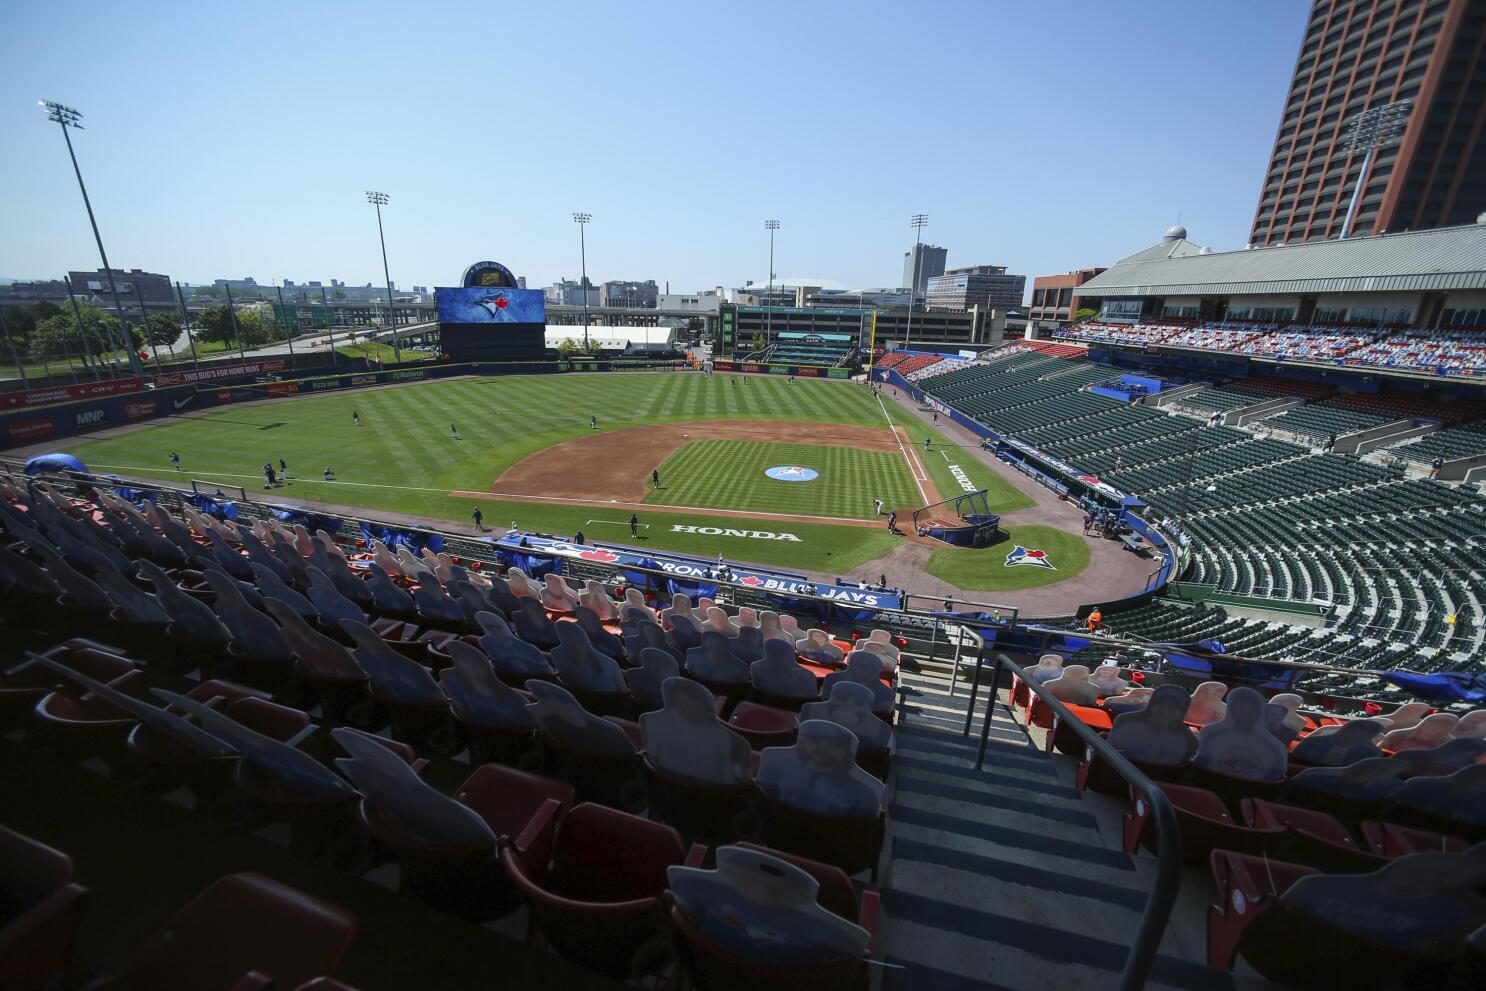 Toronto Blue Jays to begin playing 'home' games in Buffalo June 1